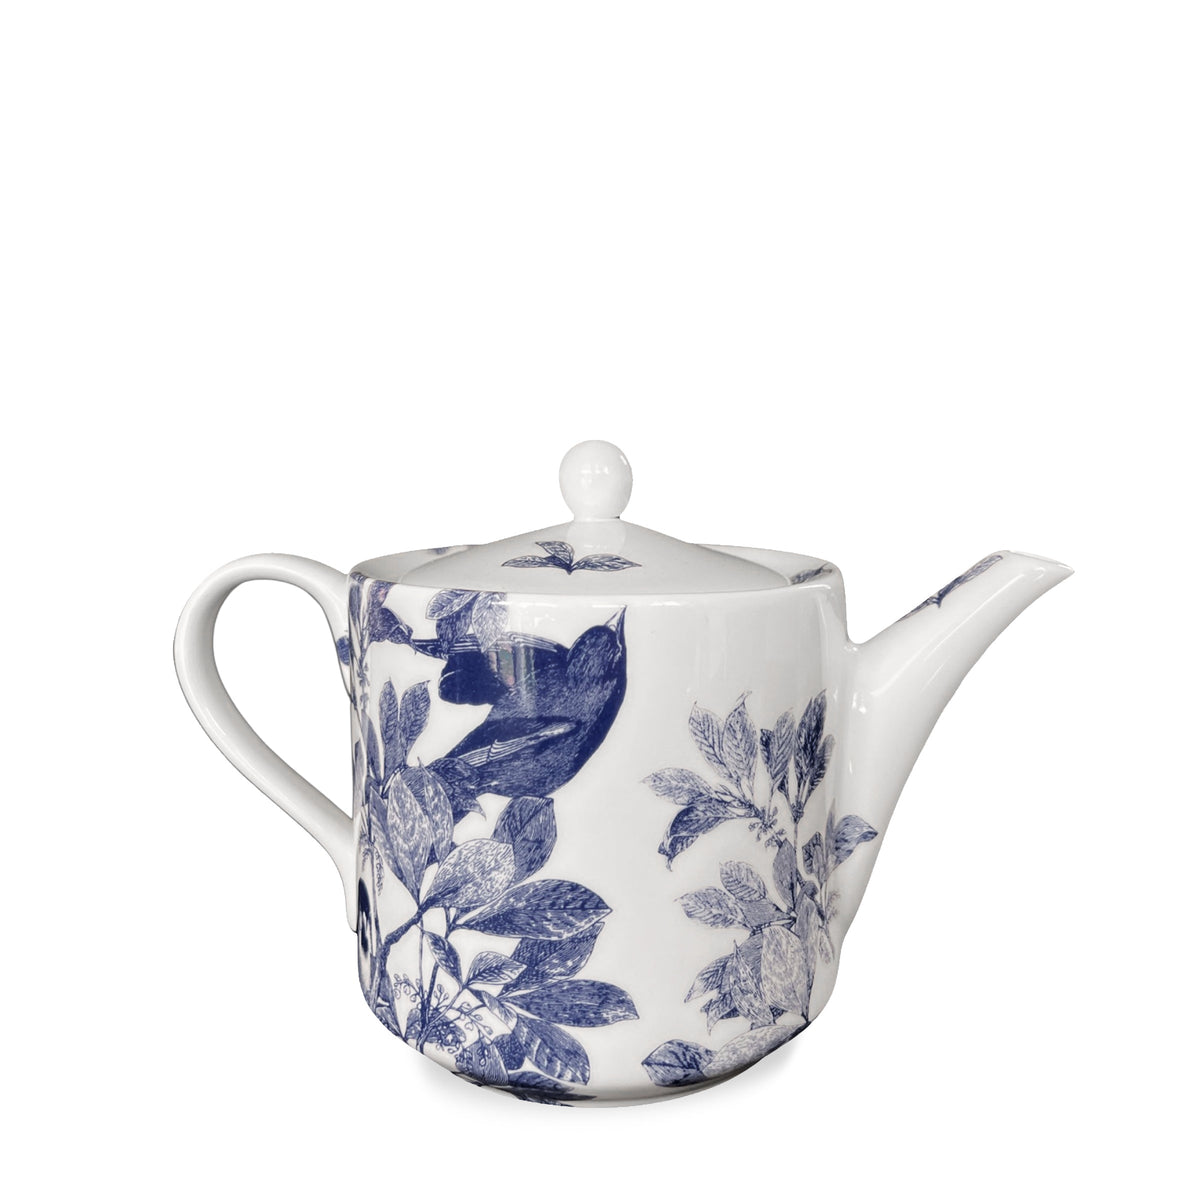 One side of the Arbor blue and white bone china teapot from Caskata features a lovely singing bird.